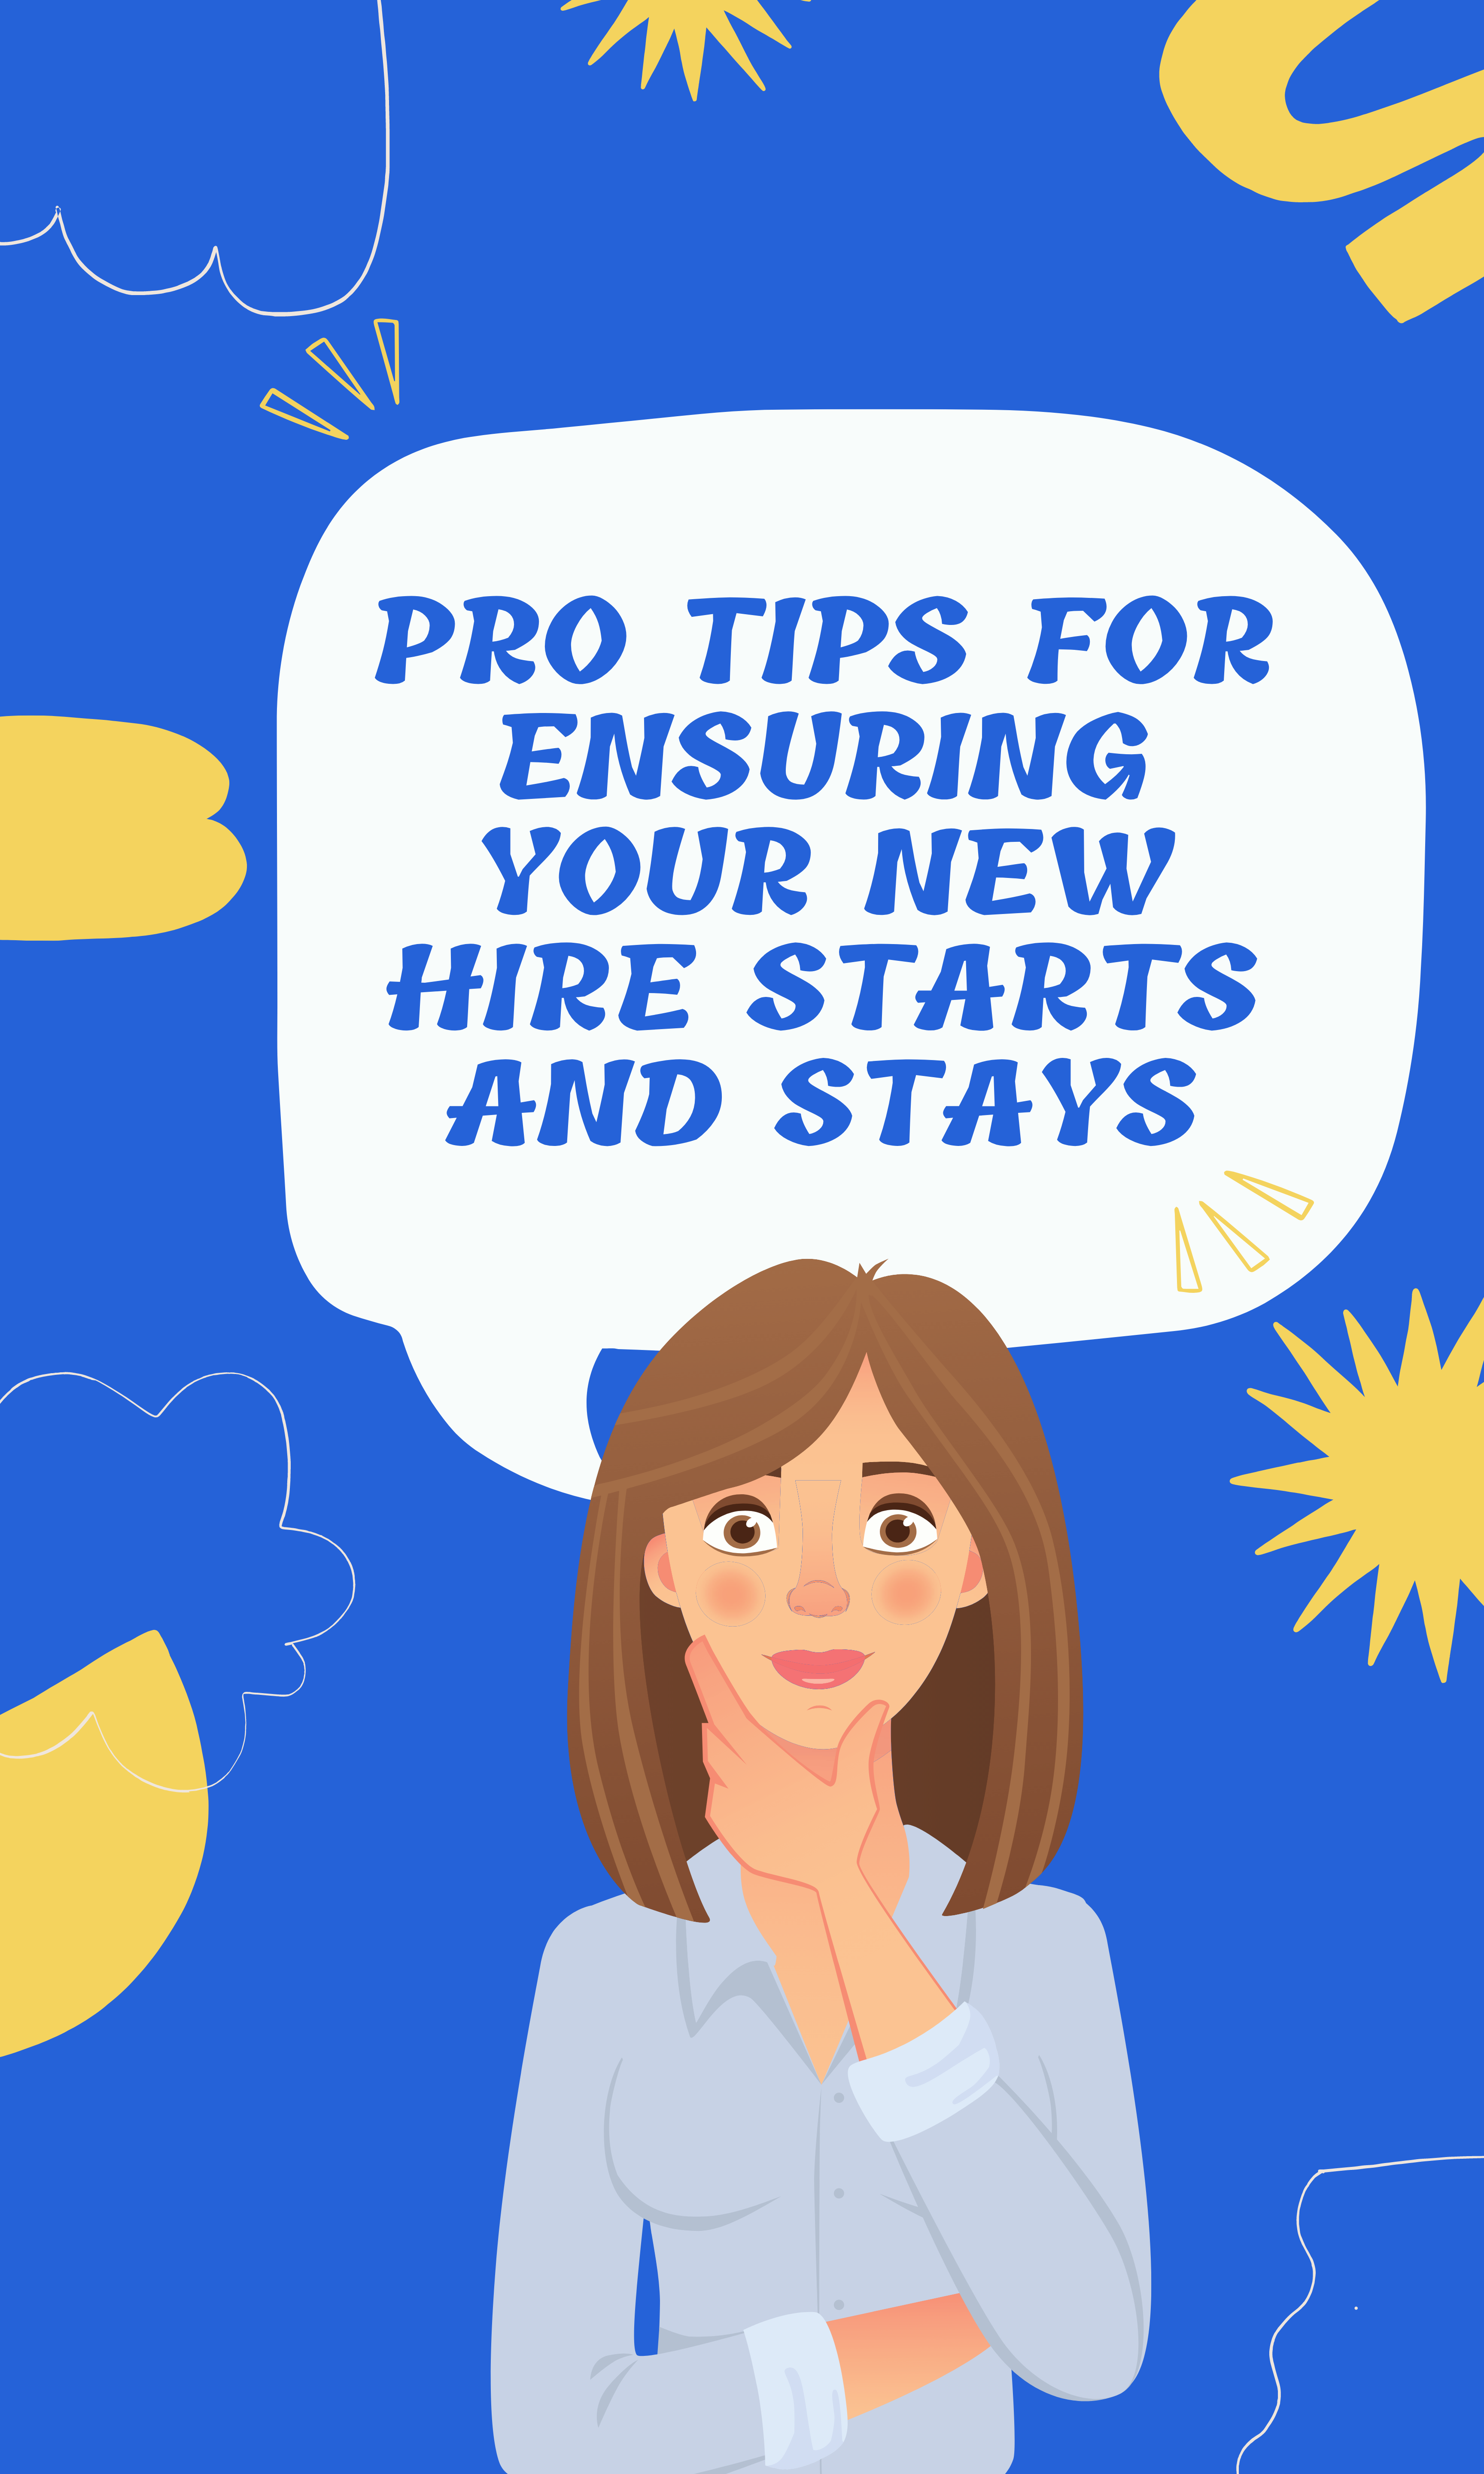 Pro Tips for Ensuring Your New Hire Starts and Stays